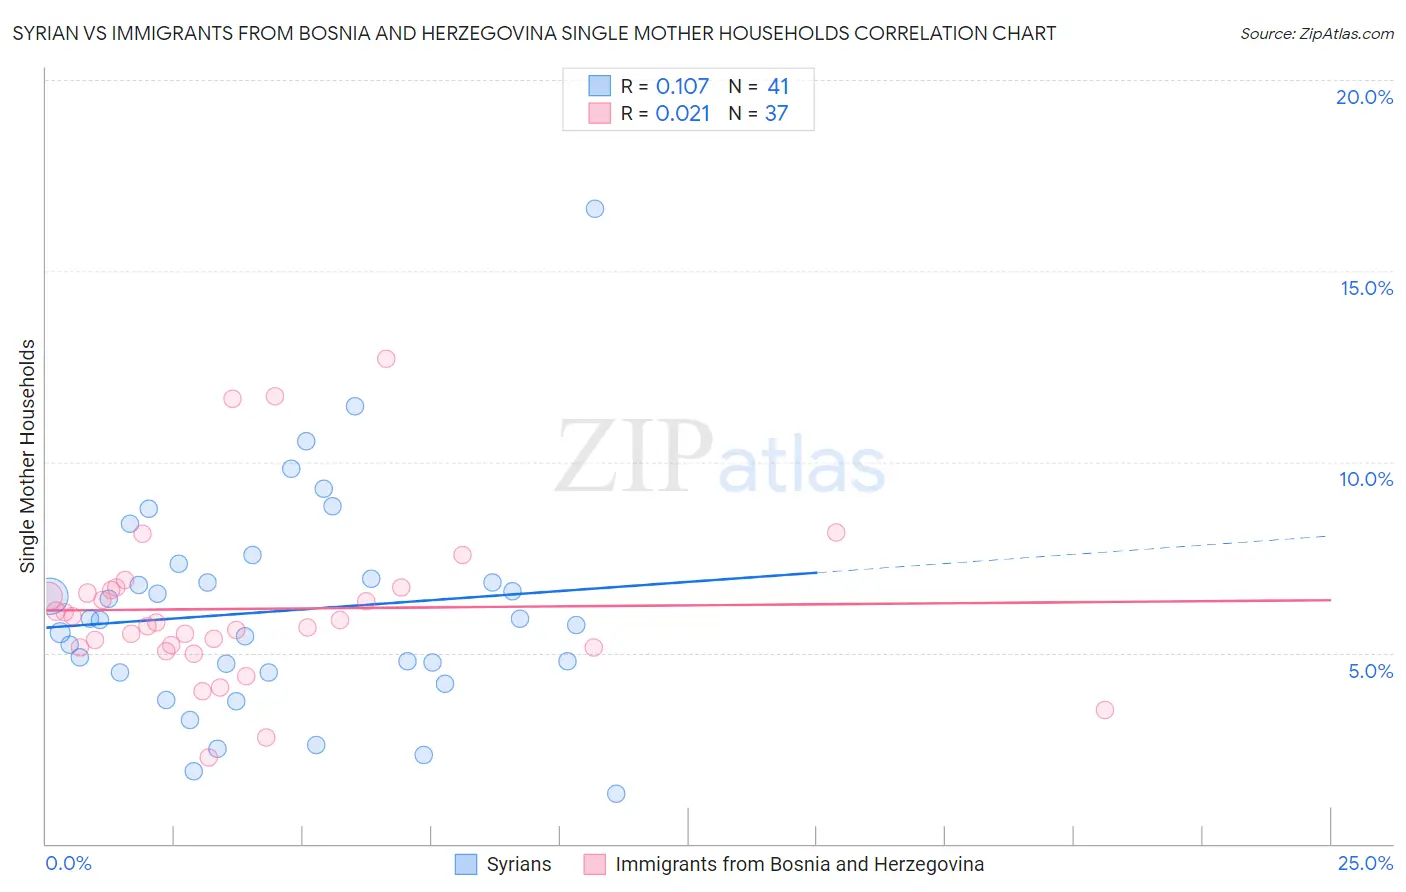 Syrian vs Immigrants from Bosnia and Herzegovina Single Mother Households